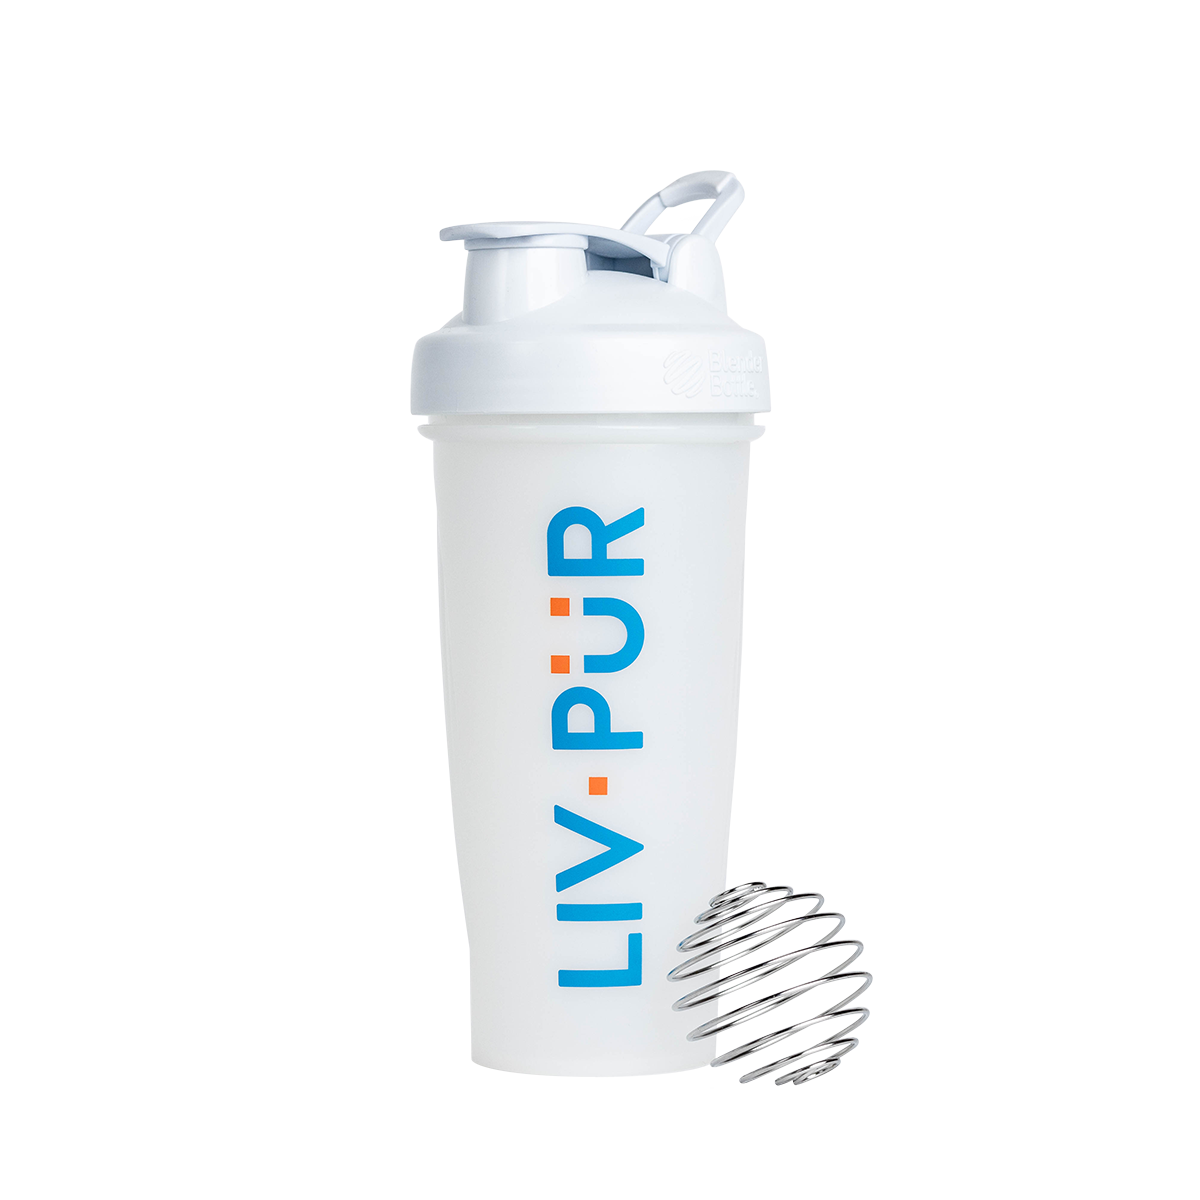 20 OZ Plastic protein shaker bottle with ball,Wholesale Protein